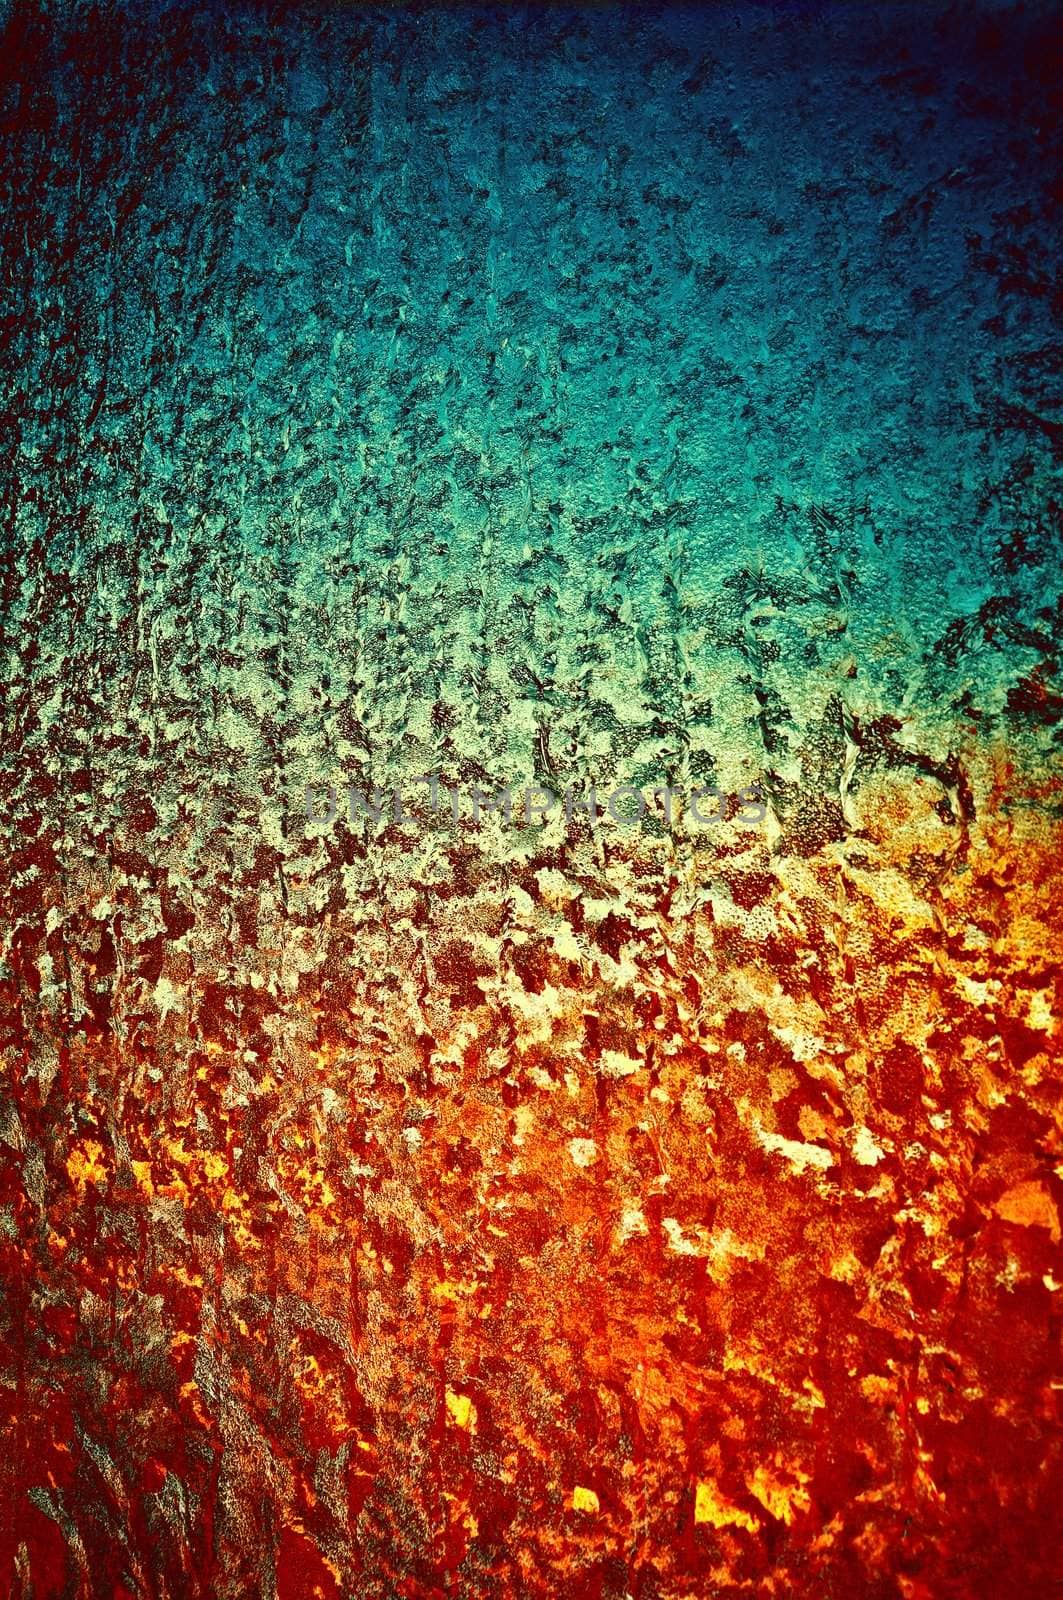 Background a texture. A winter window become covered by patterns from colour ice